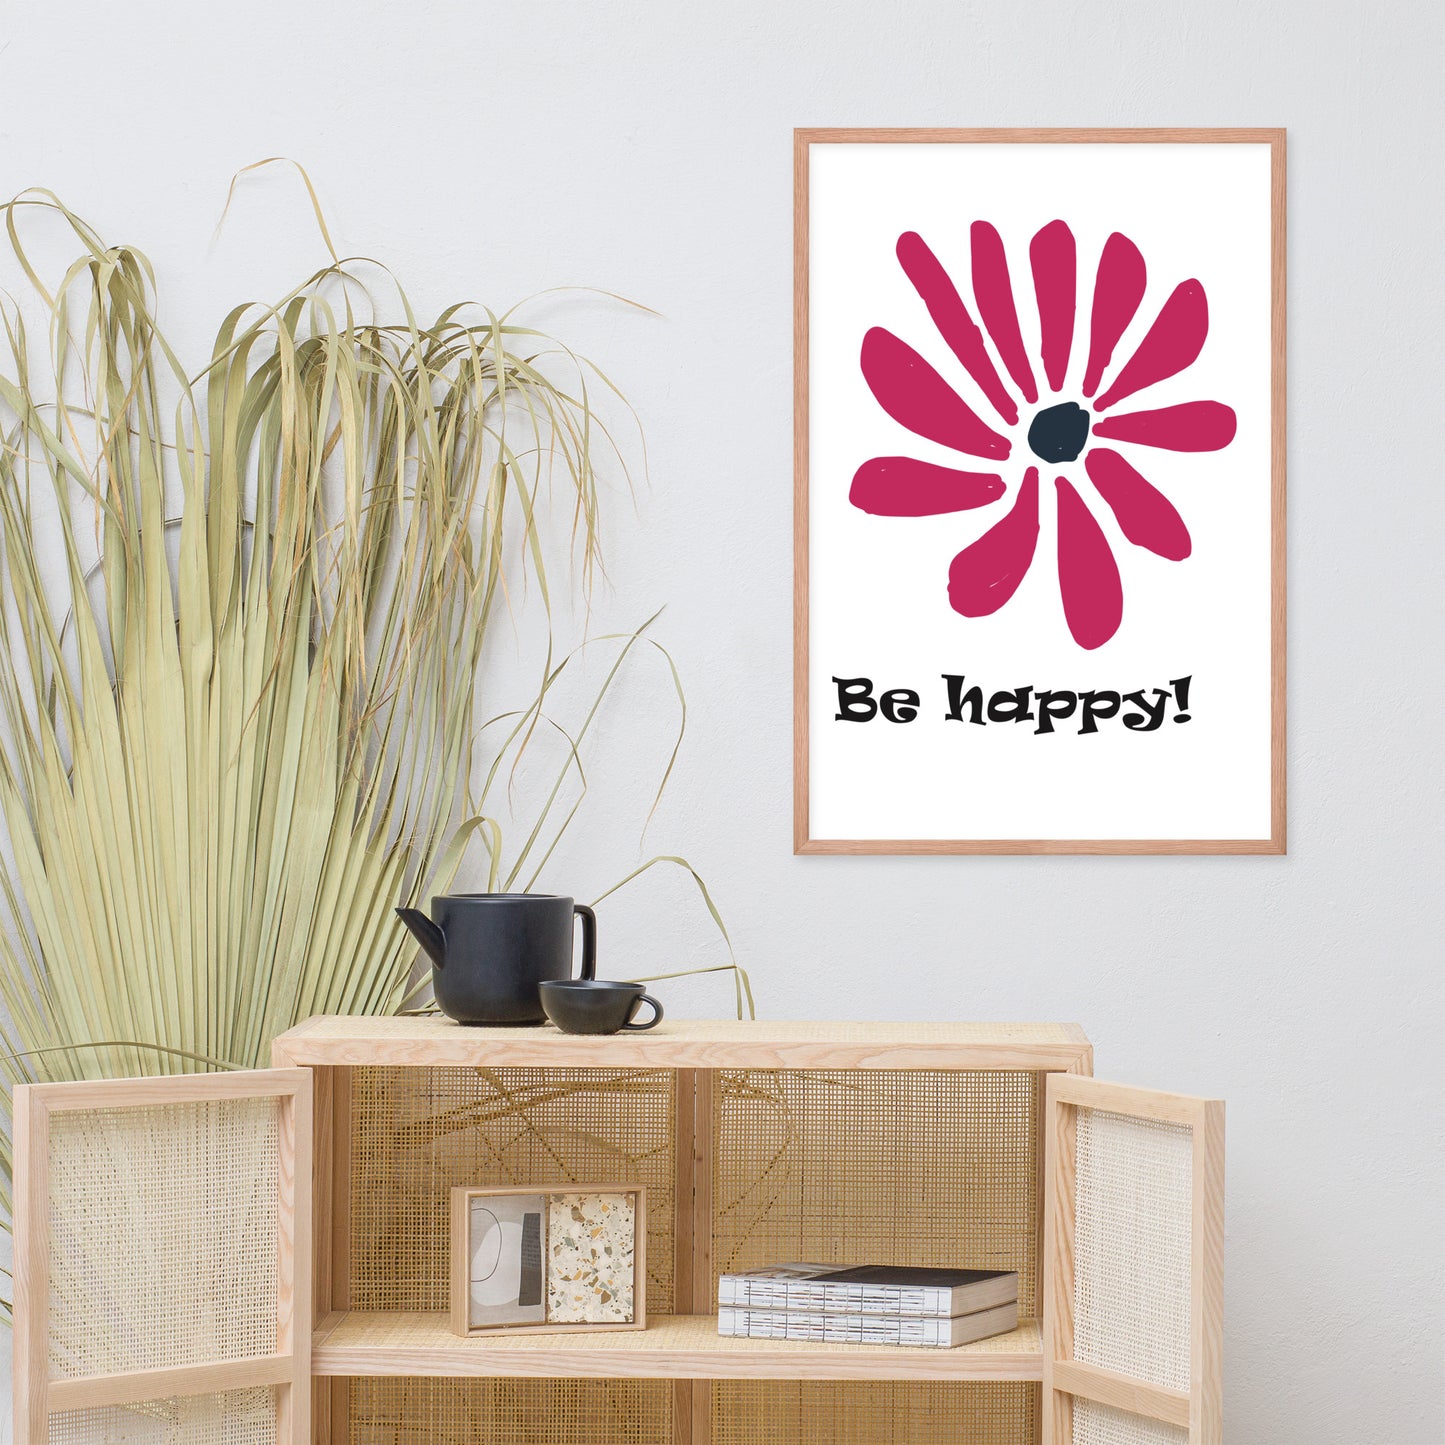 Be happy! abstract flower, framed poster, designed by John Pierce.